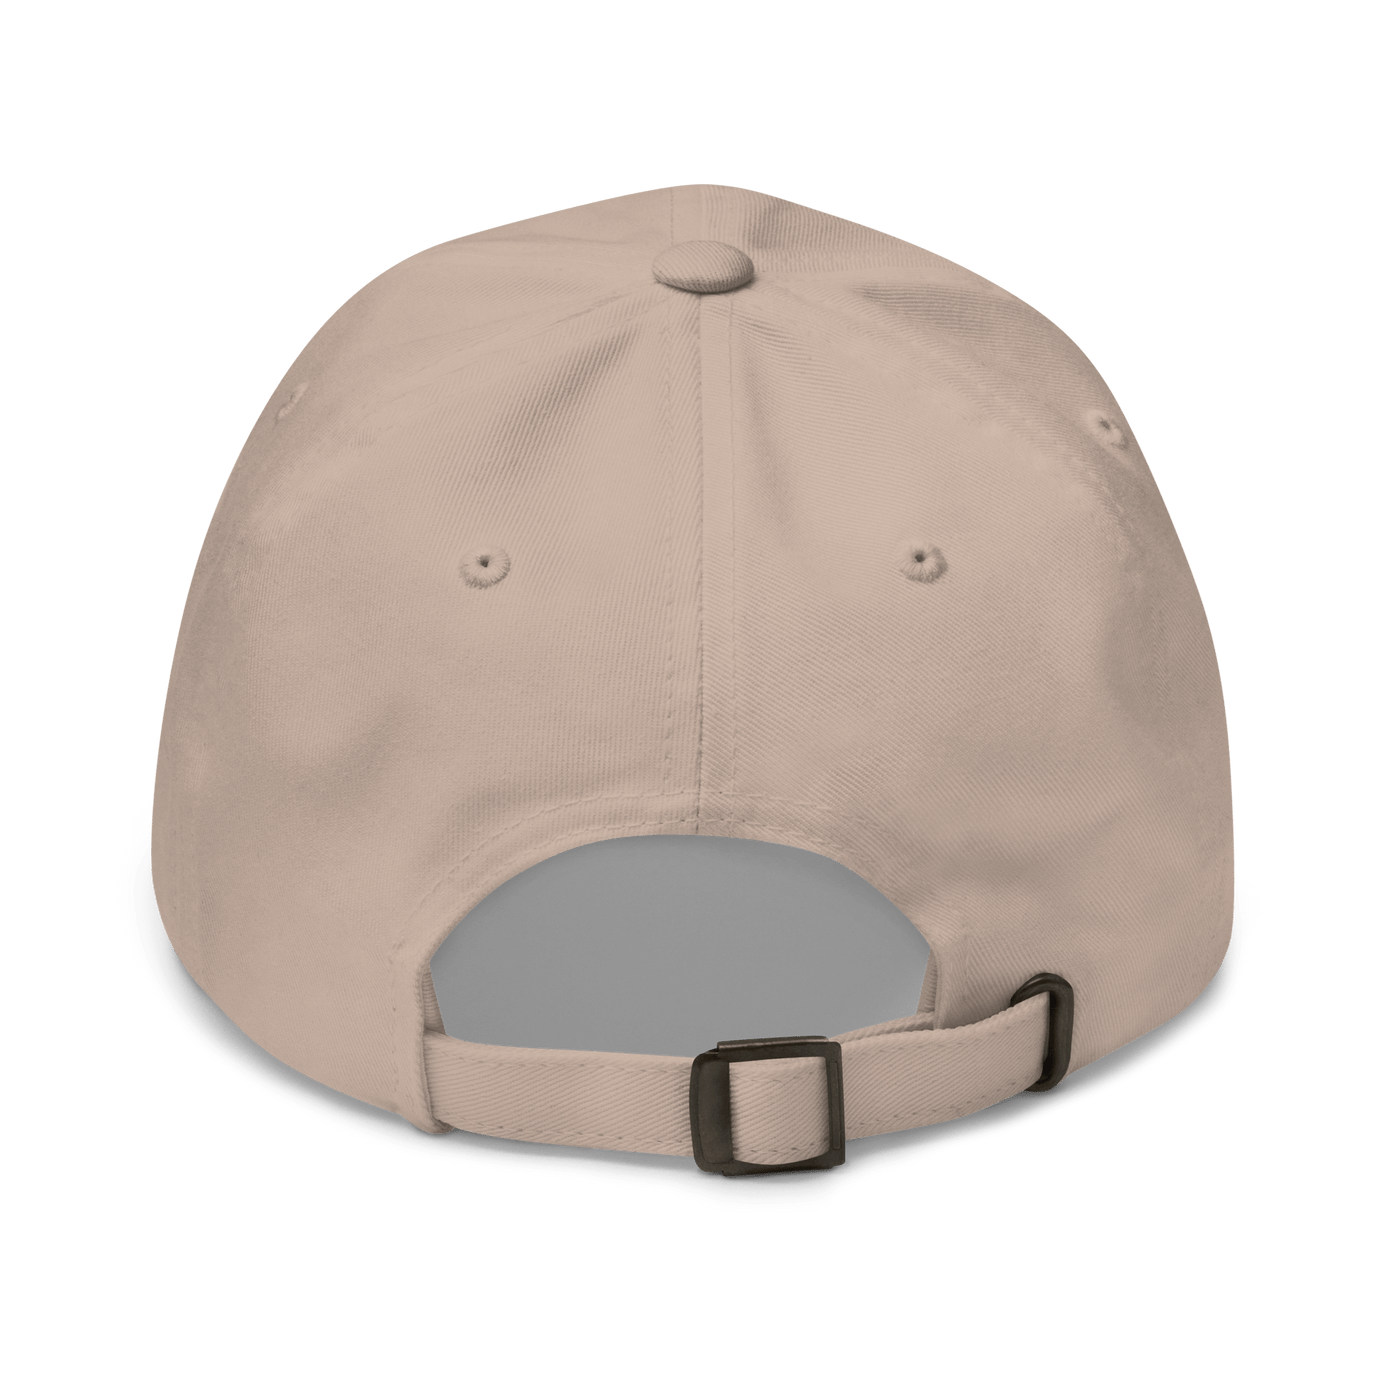 Shit Show Supervisor Dad hat - Khaki - Just Another Cap Store